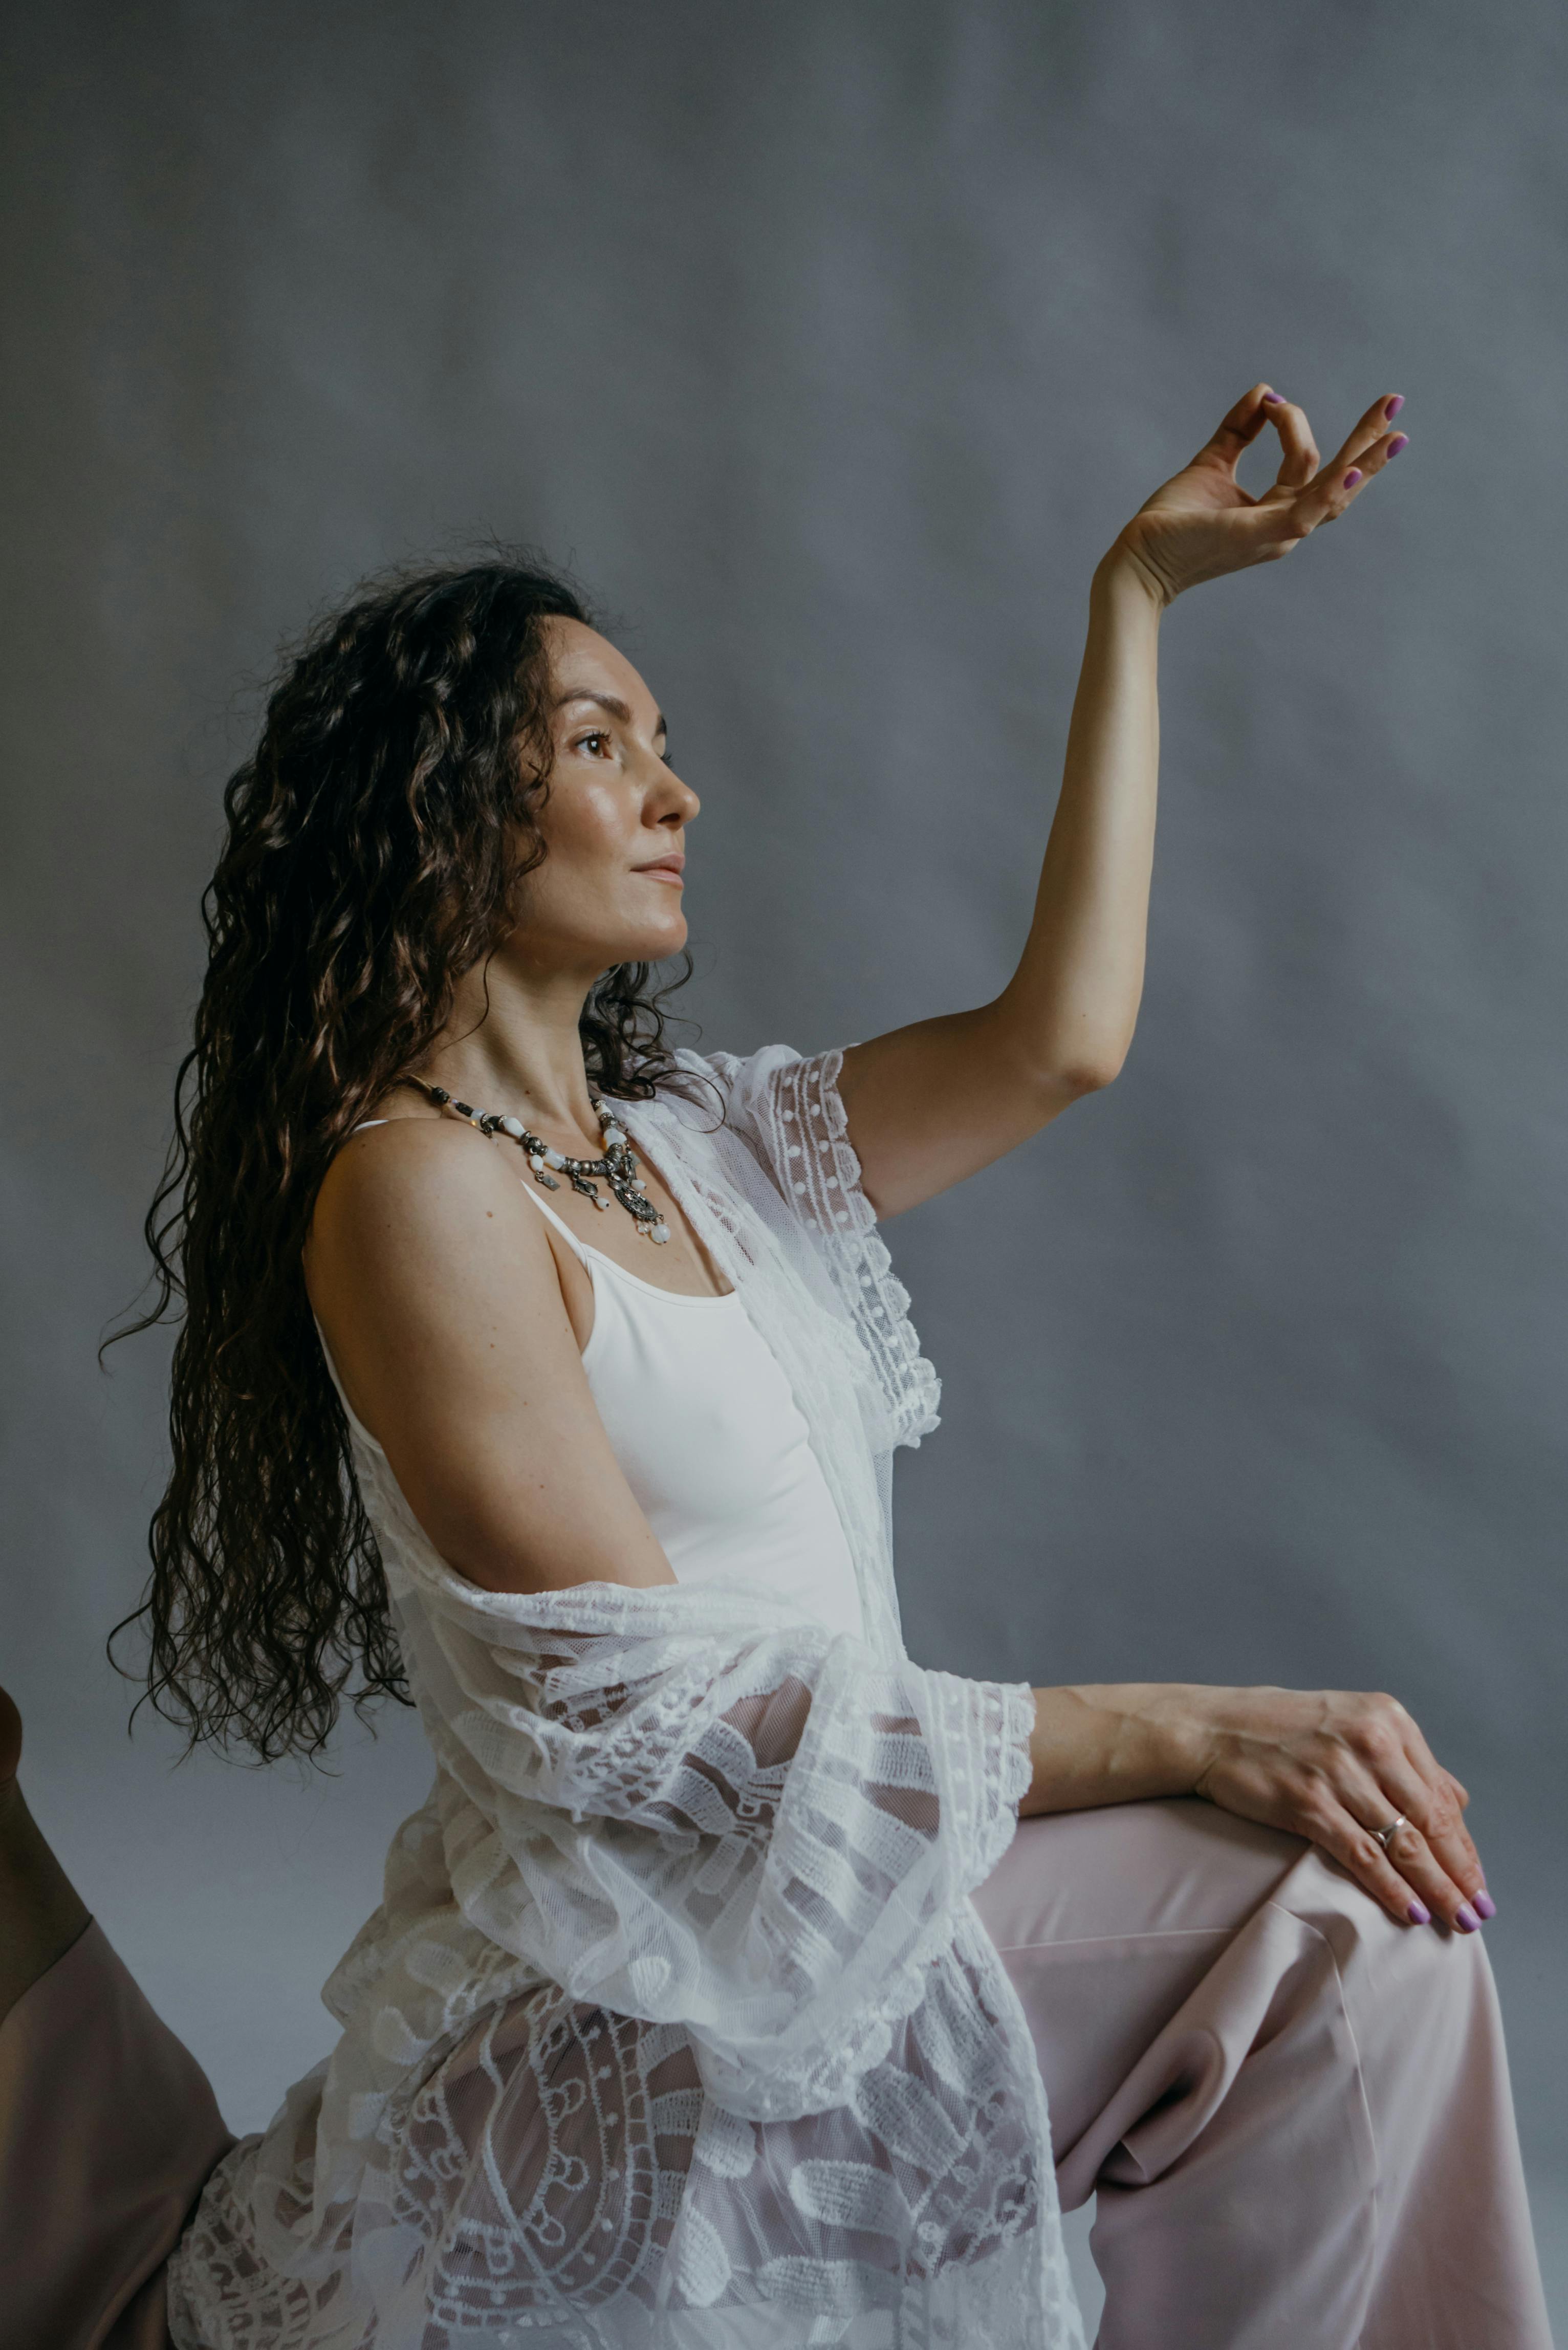 A Woman in White Dress Doing Yoga · Free Stock Photo